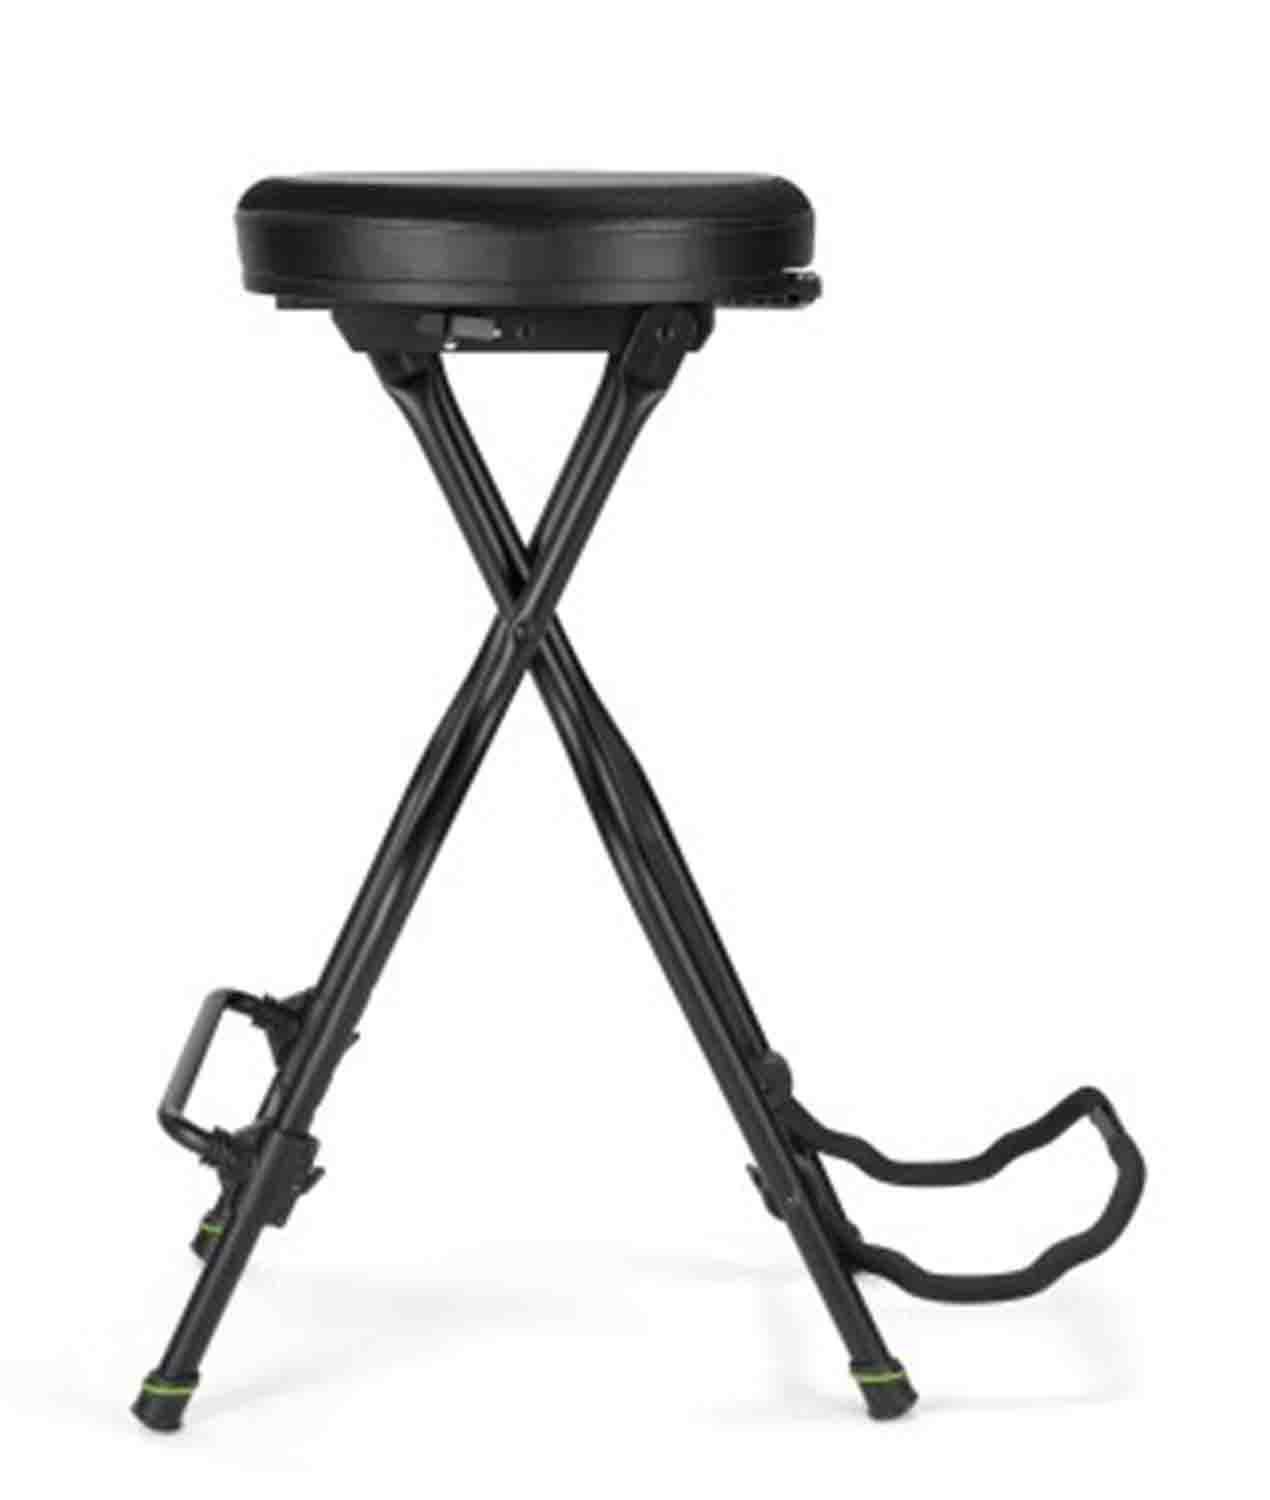 B-Stock: Gravity FG SEAT 1 Musician Seat with Guitar Stand by Gravity